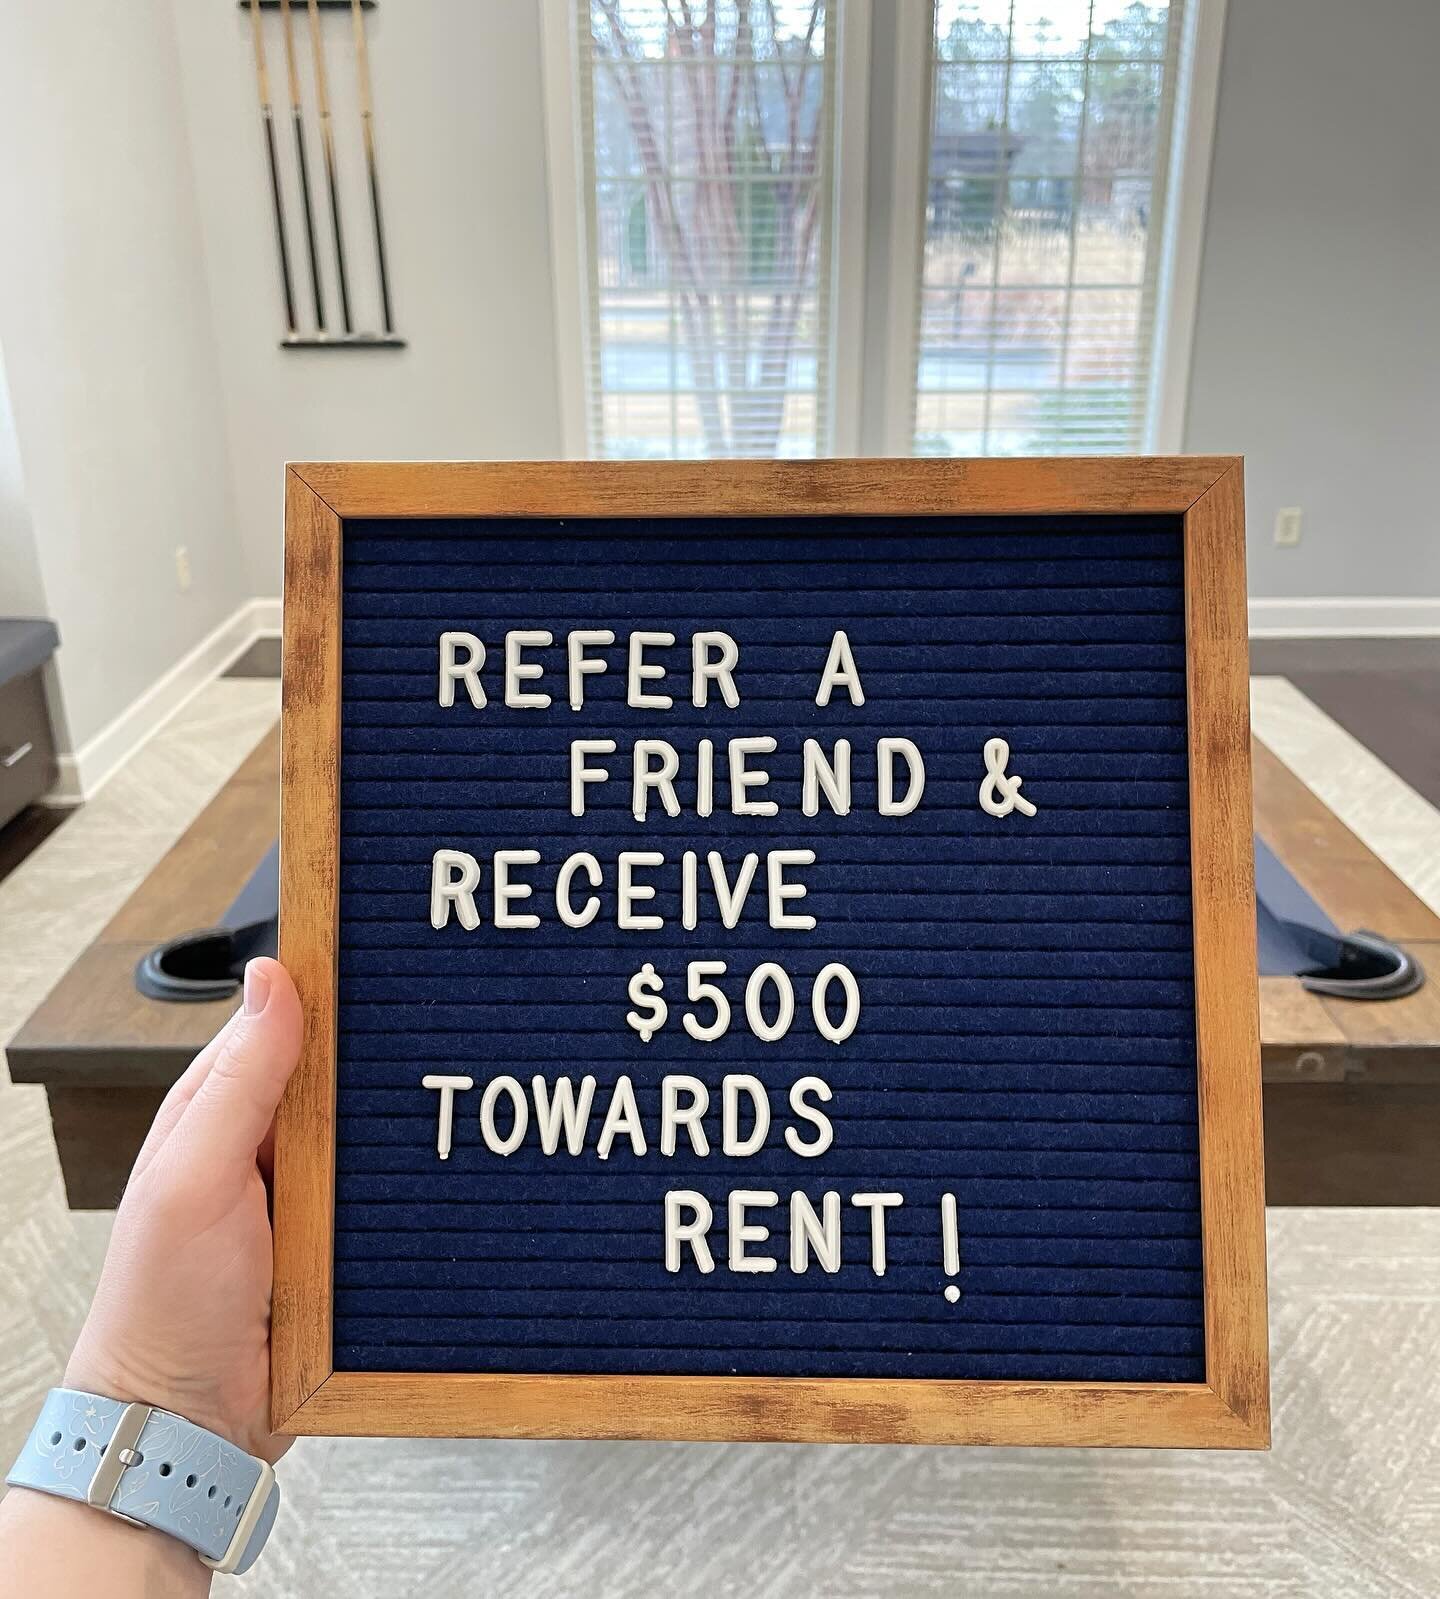 Attention Residents ‼️ Refer a friend a receive $500 towards rent 💰 Contact the office to learn more!